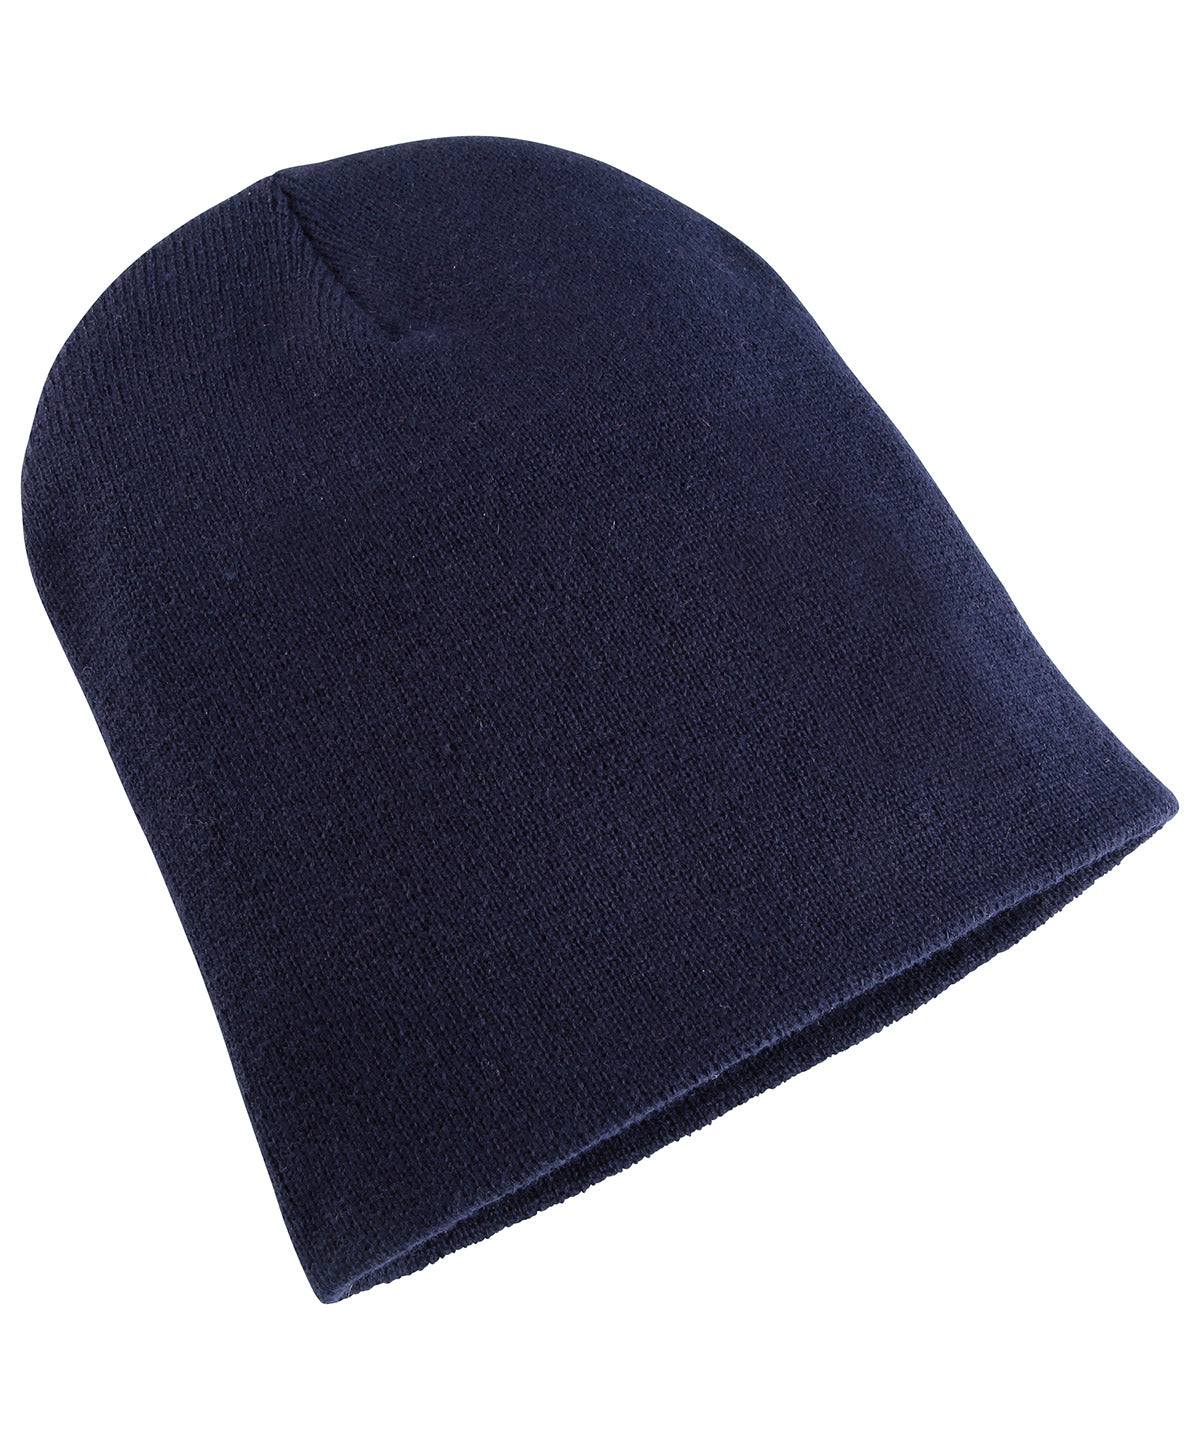 Navy - Heavyweight long beanie (1501KC) Hats Flexfit by Yupoong Headwear, Must Haves, New Colours for 2023, Winter Essentials Schoolwear Centres